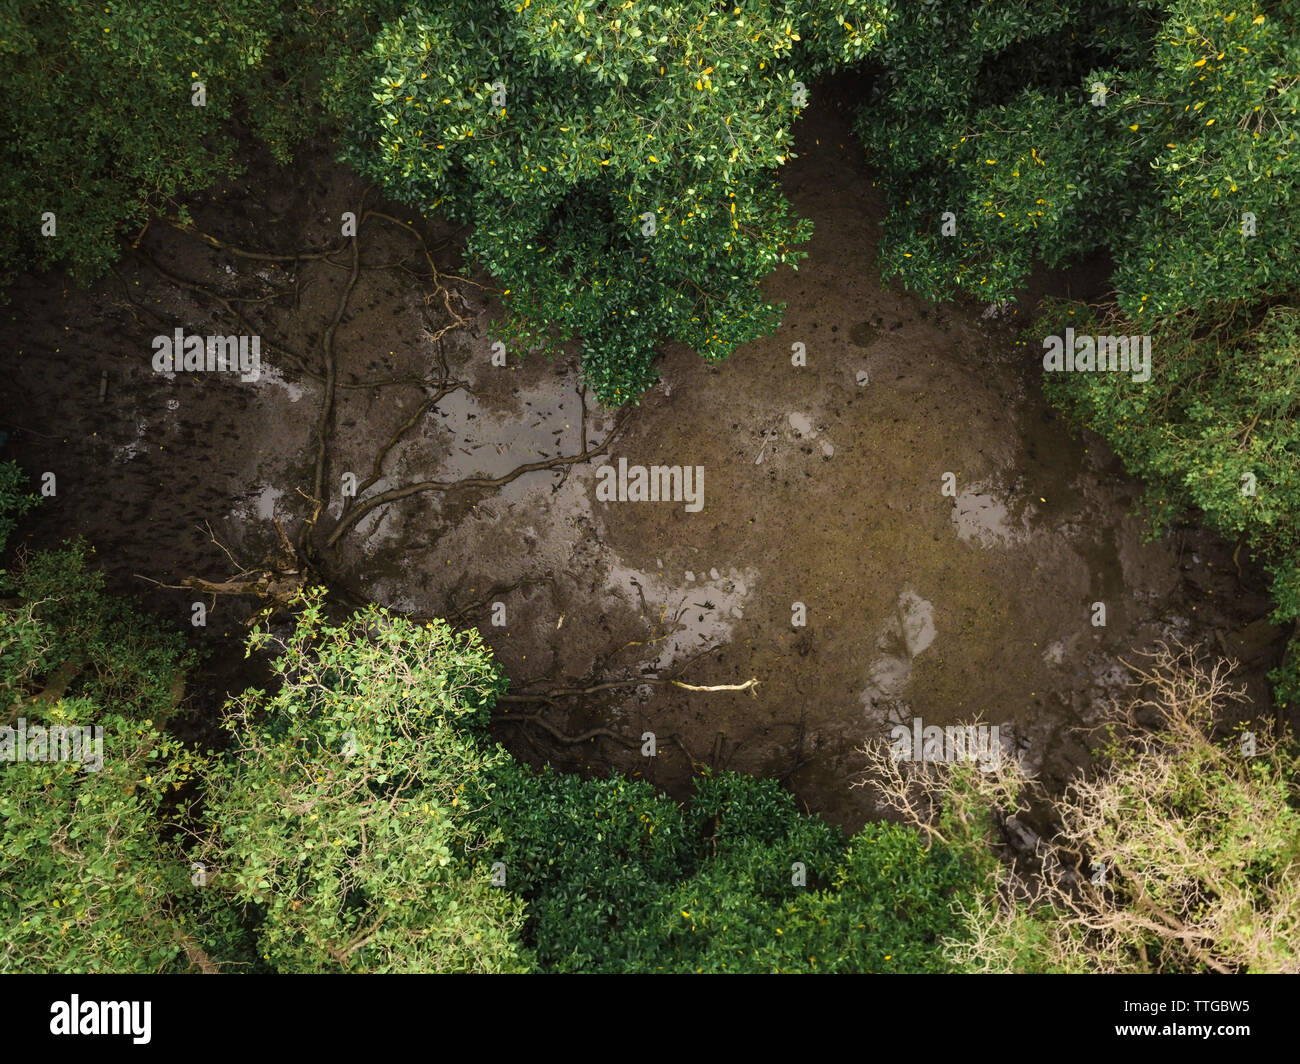 Aerial view of the mangrove forest Stock Photo